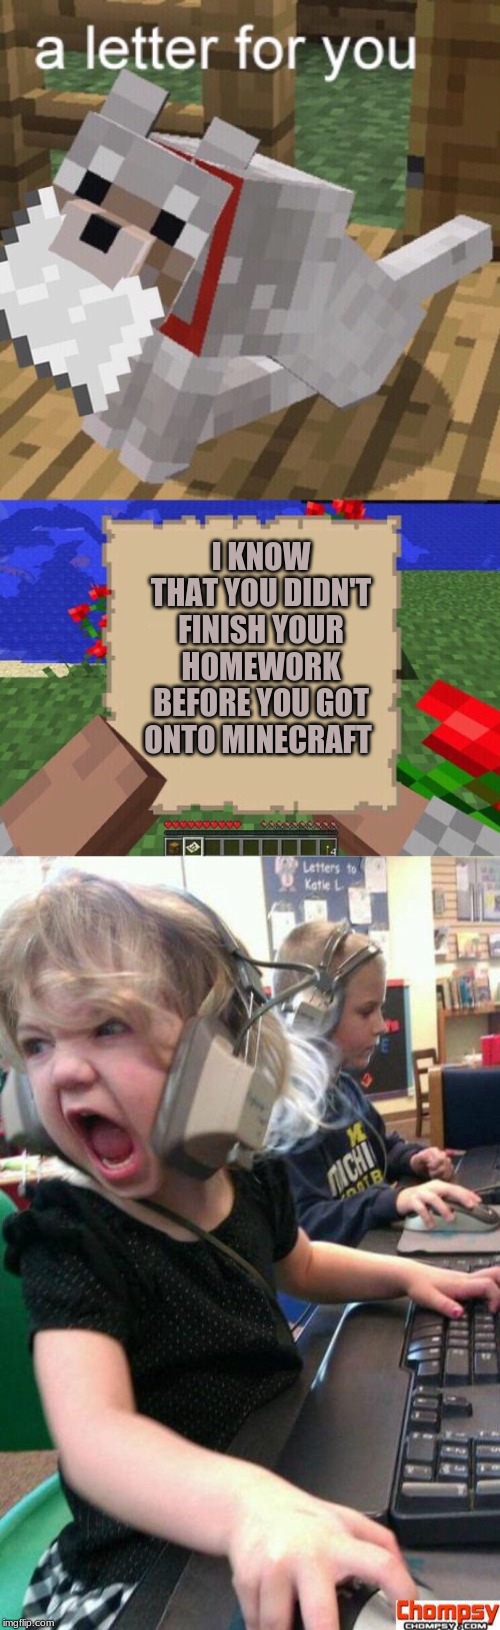 Moms be like | I KNOW THAT YOU DIDN'T FINISH YOUR HOMEWORK BEFORE YOU GOT ONTO MINECRAFT | image tagged in screaming gamer girl,minecraft mail,homework | made w/ Imgflip meme maker